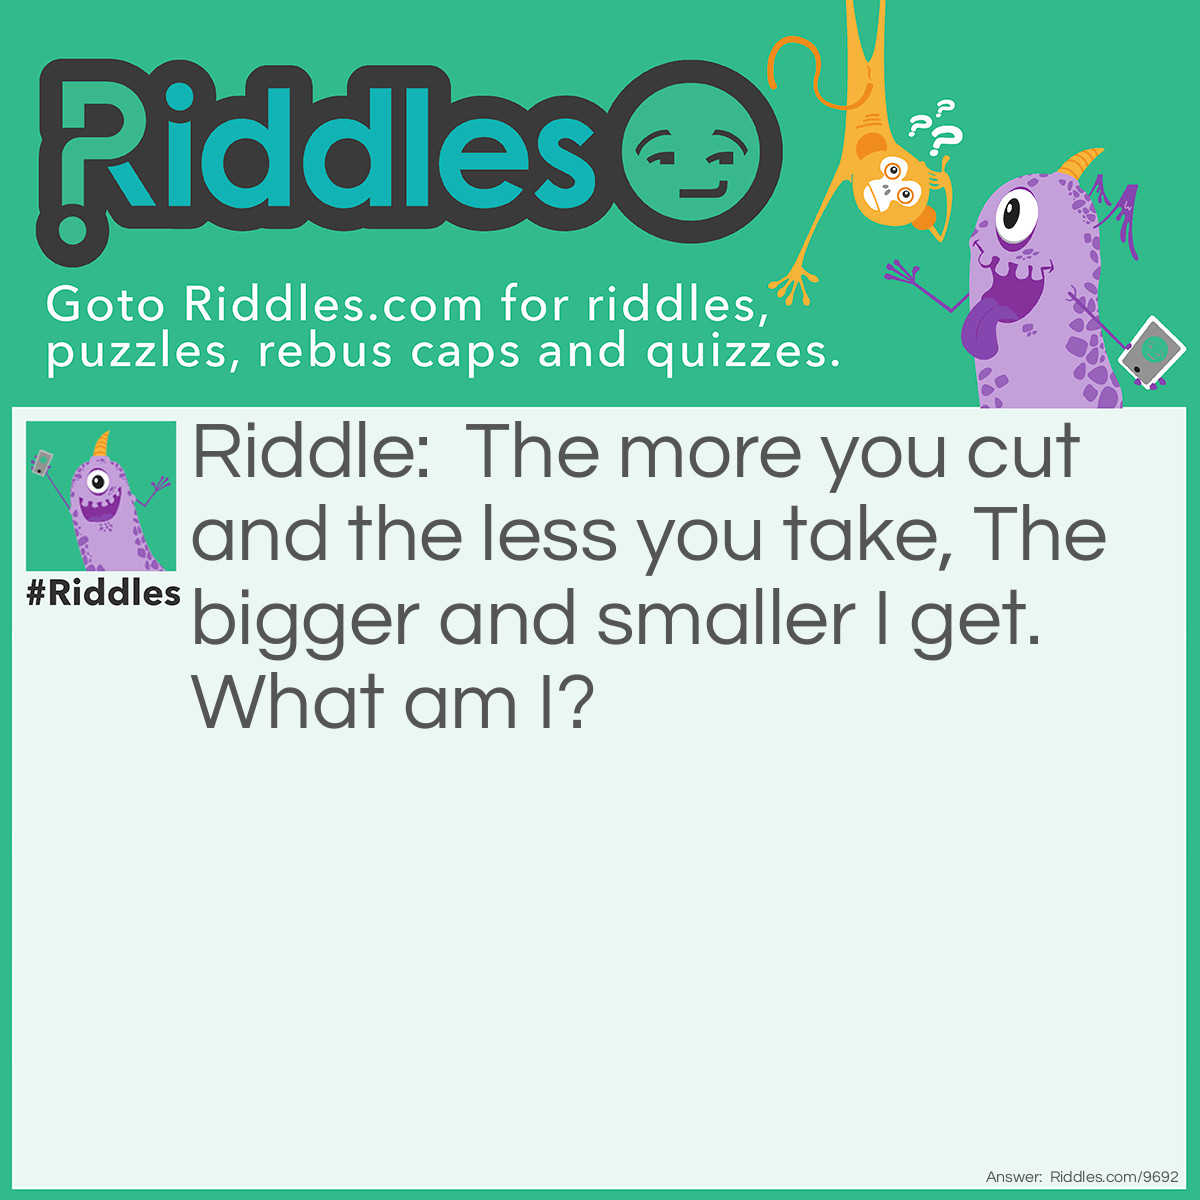 Riddle: The more you cut and the less you take, The bigger and smaller I get. What am I? Answer: A fraction! Well done if you got it that’s hard!